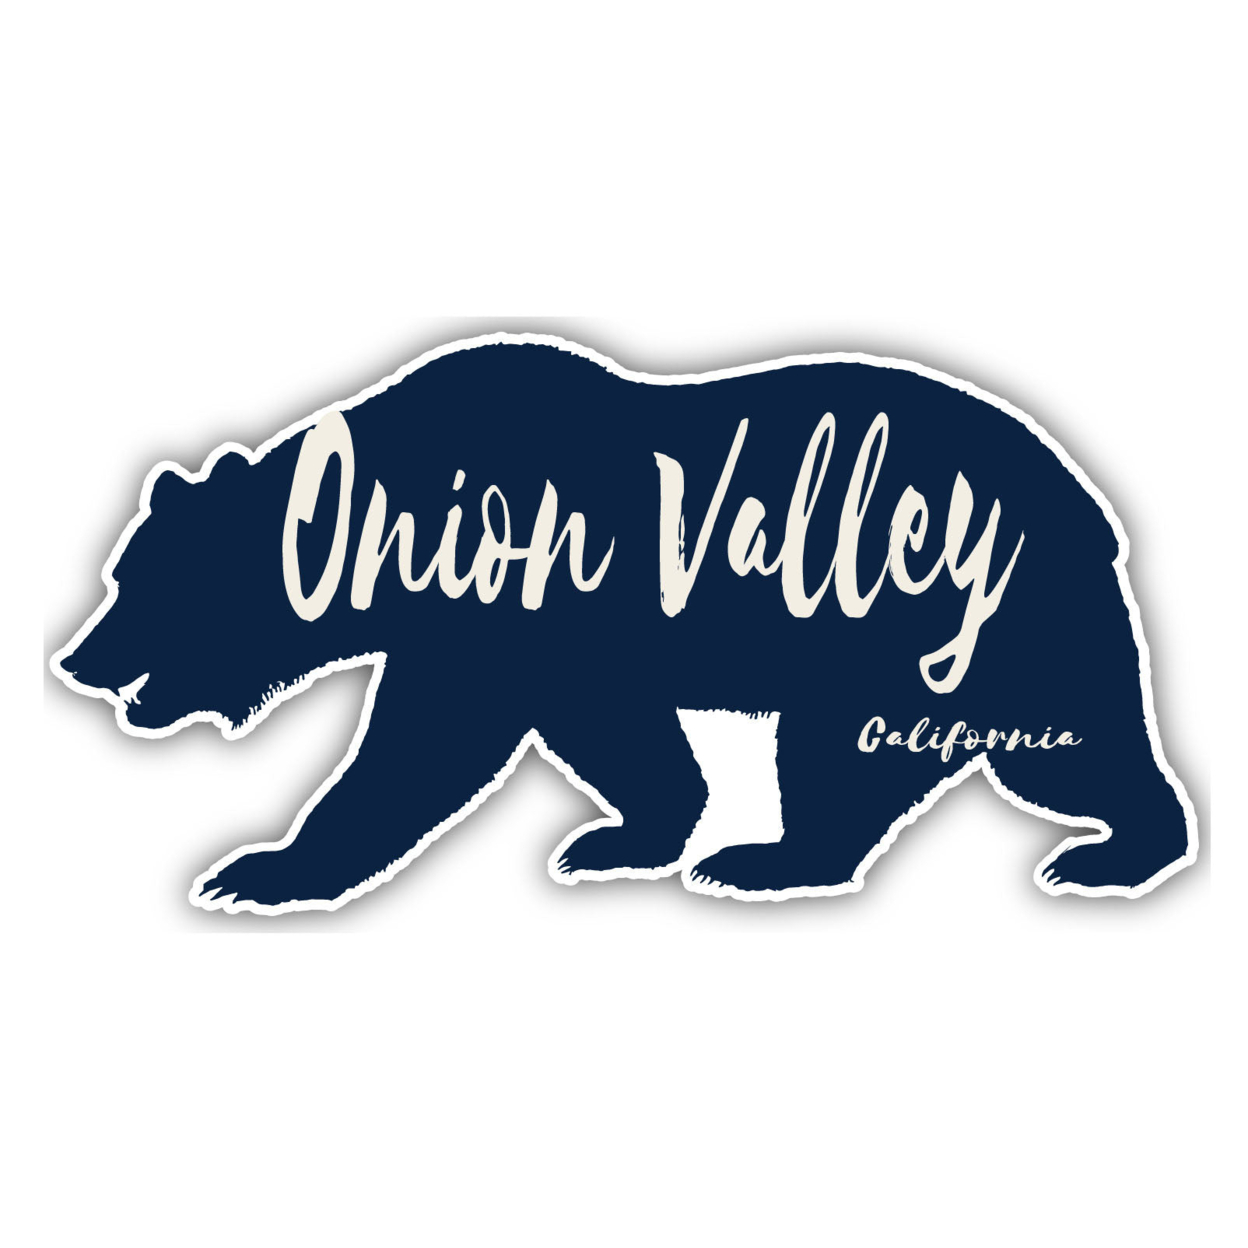 Onion Valley California Souvenir Decorative Stickers (Choose Theme And Size) - Single Unit, 2-Inch, Great Outdoors